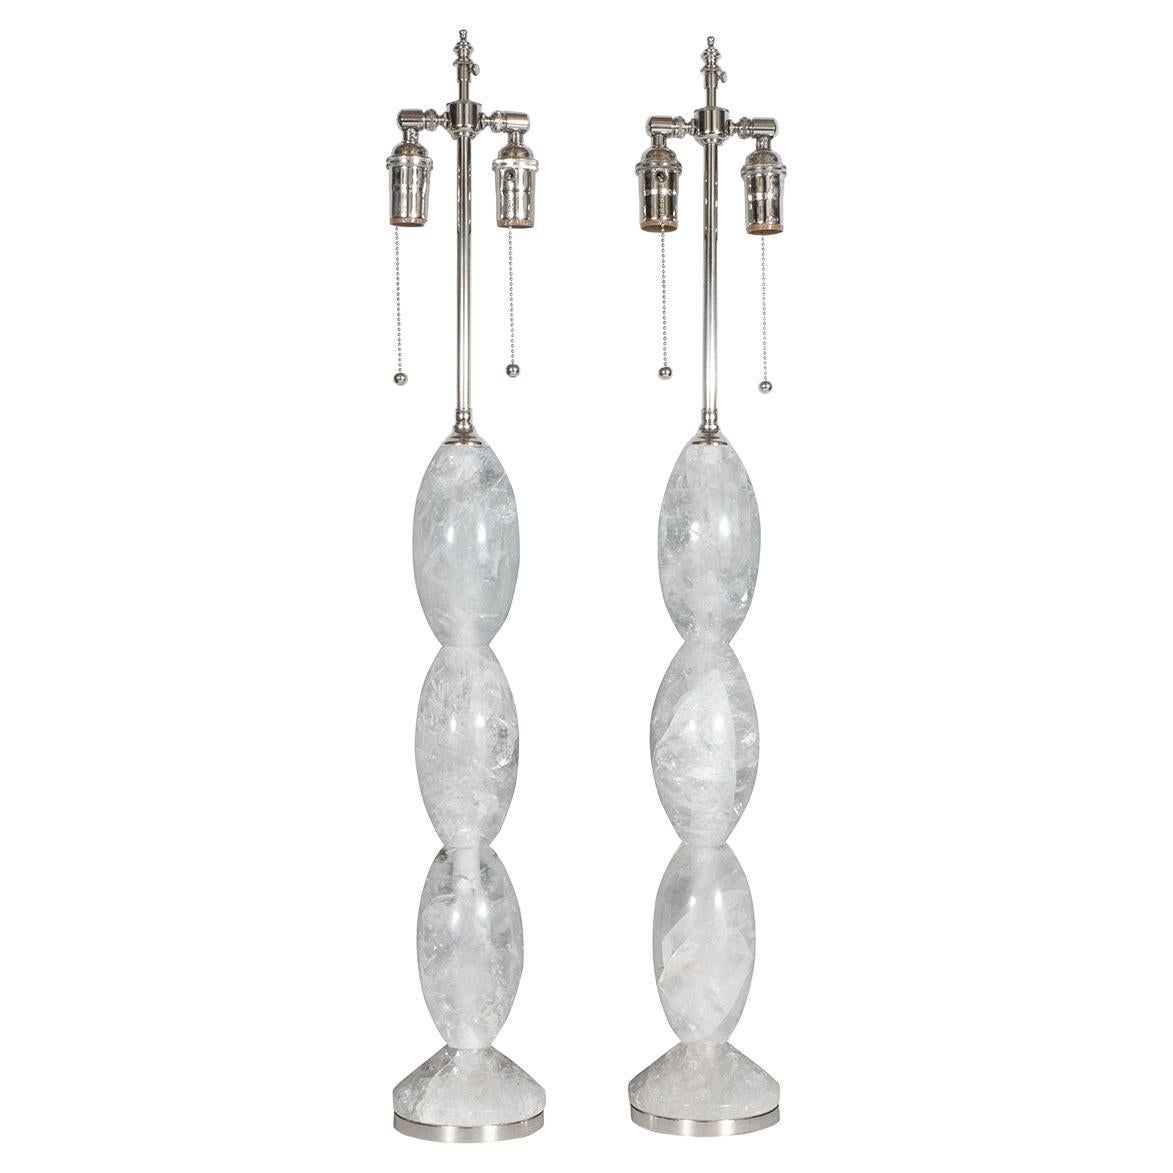 Pair of Hand-Cut and Polished Stacked Rock Crystal Table Lamps by Spark Interior For Sale